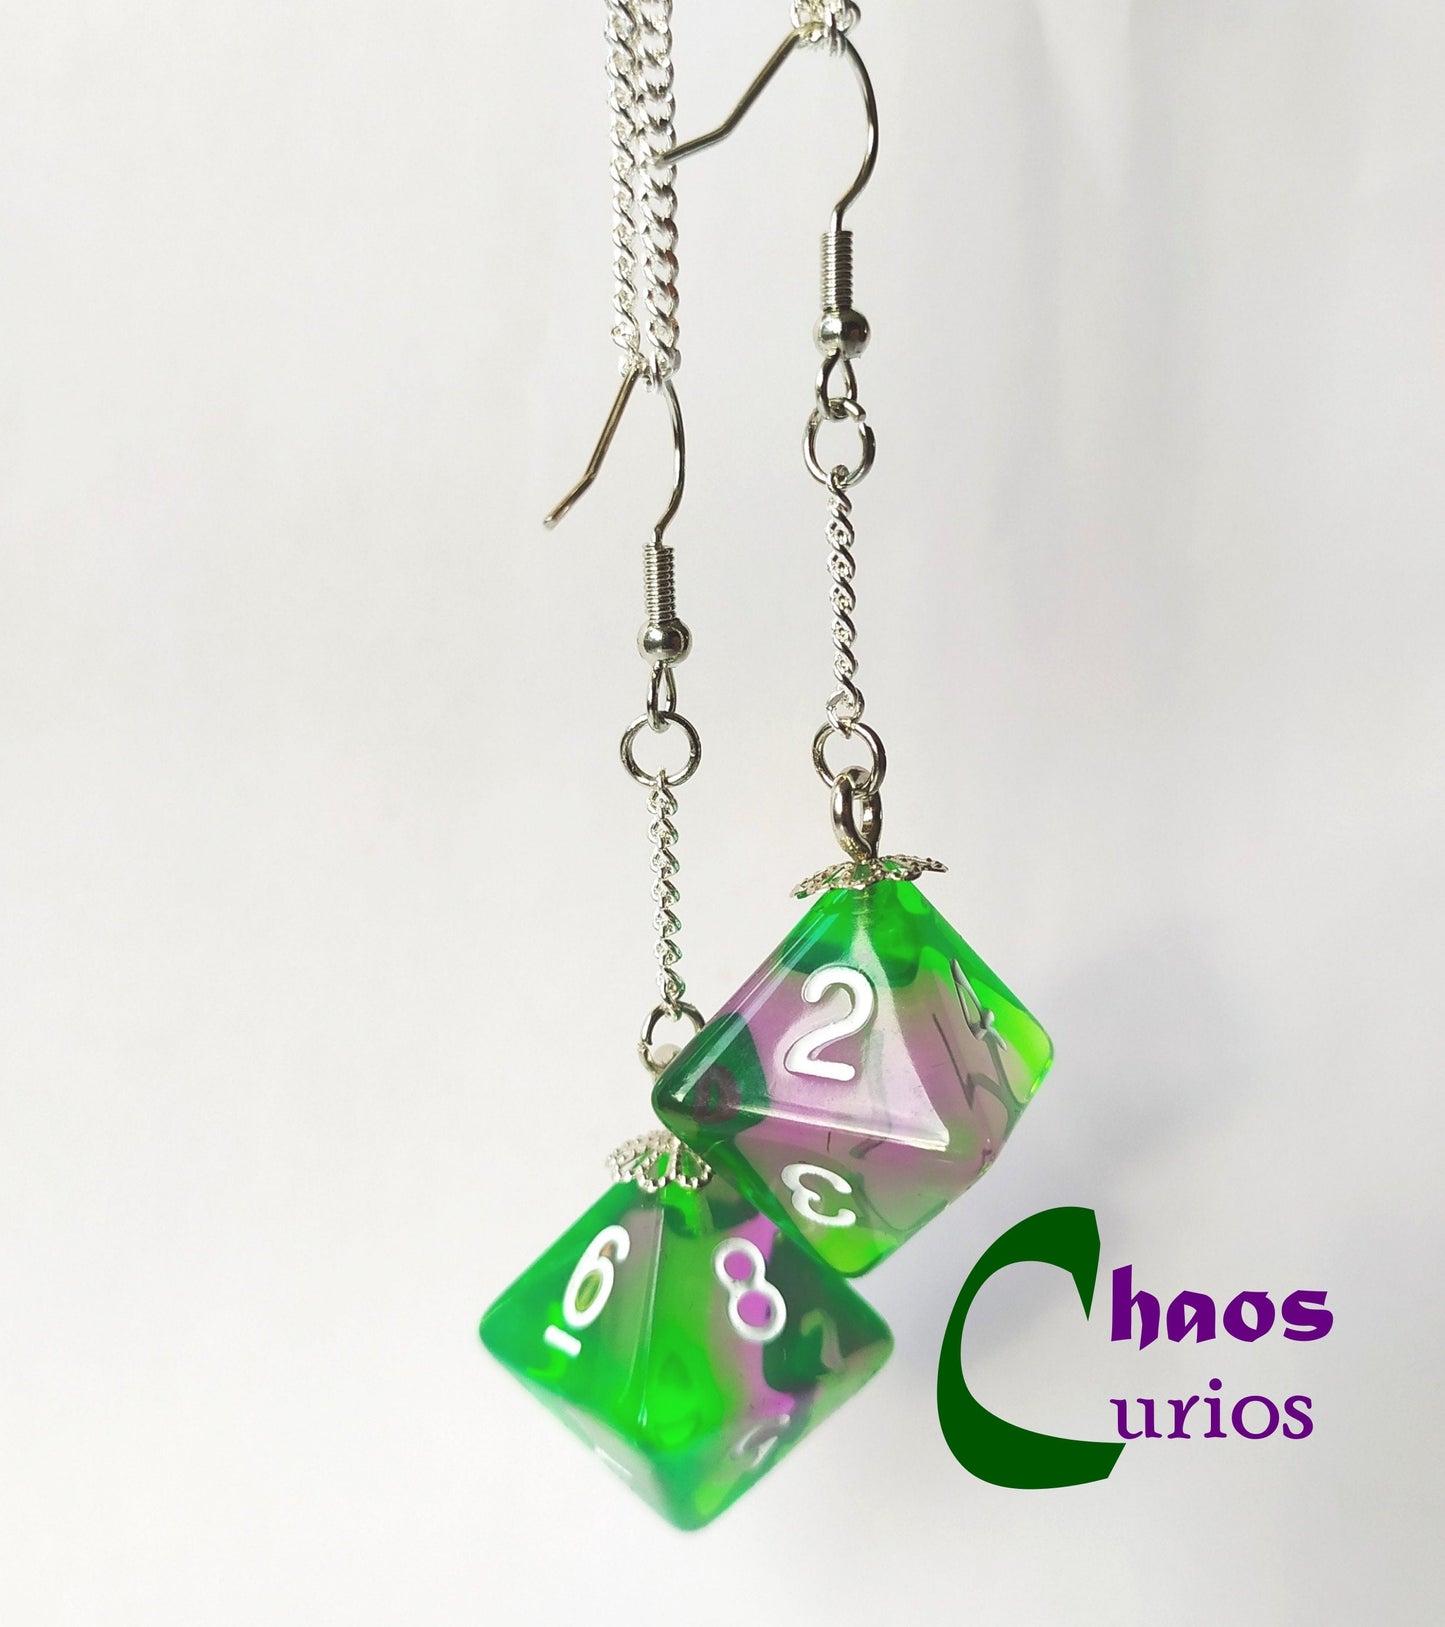 D8 Dice Earrings, Silver Finishing, Dnd Swag